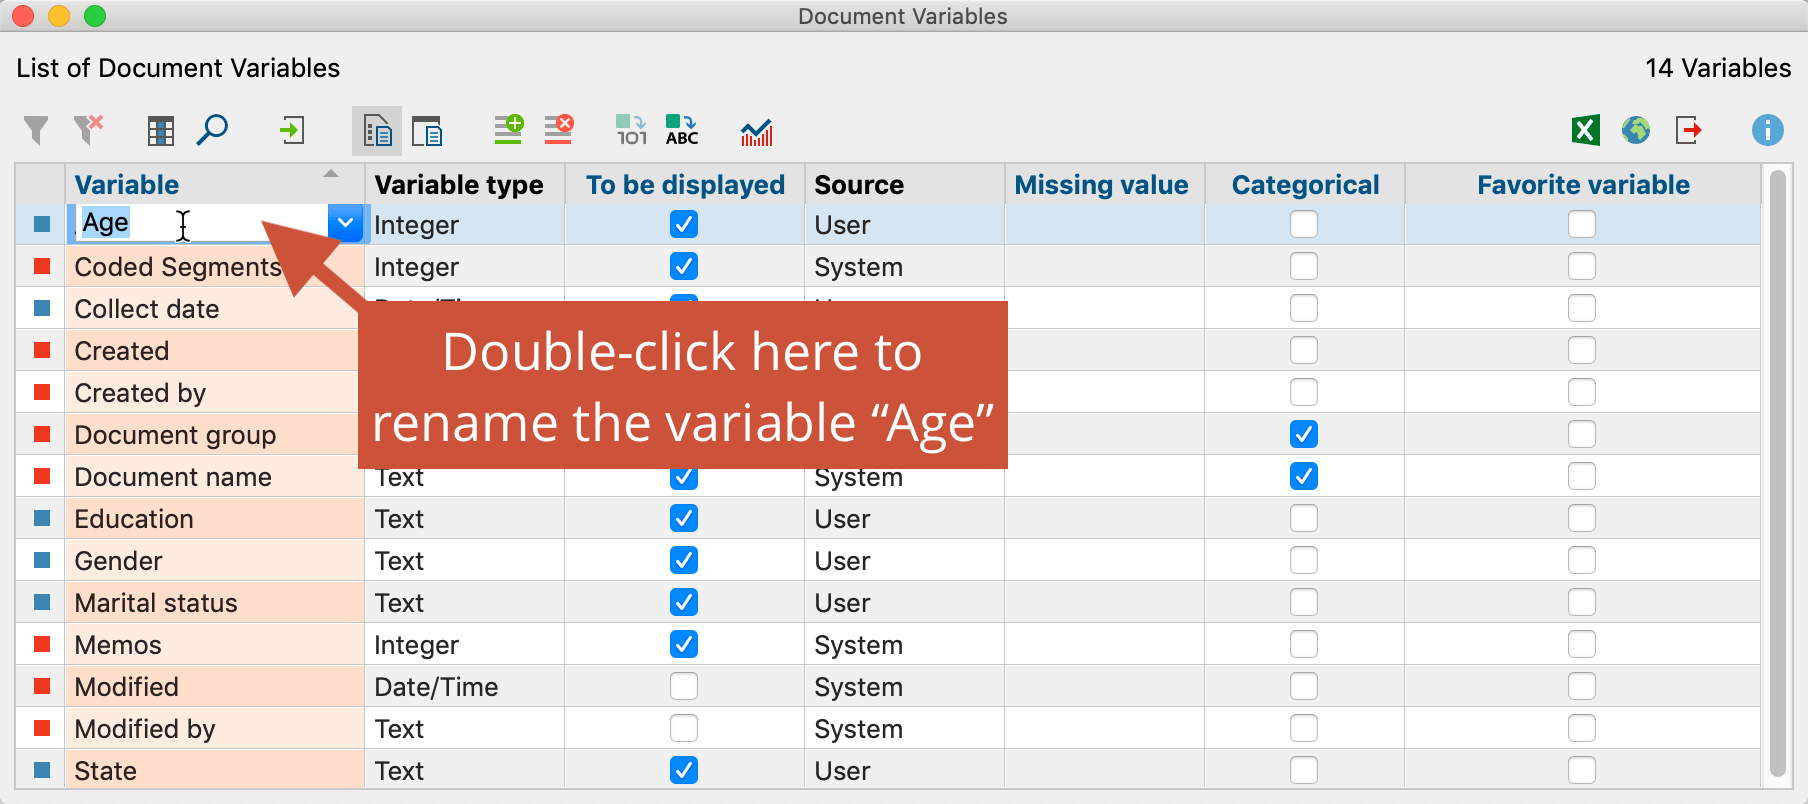 Renaming a variable in “List of document variables”